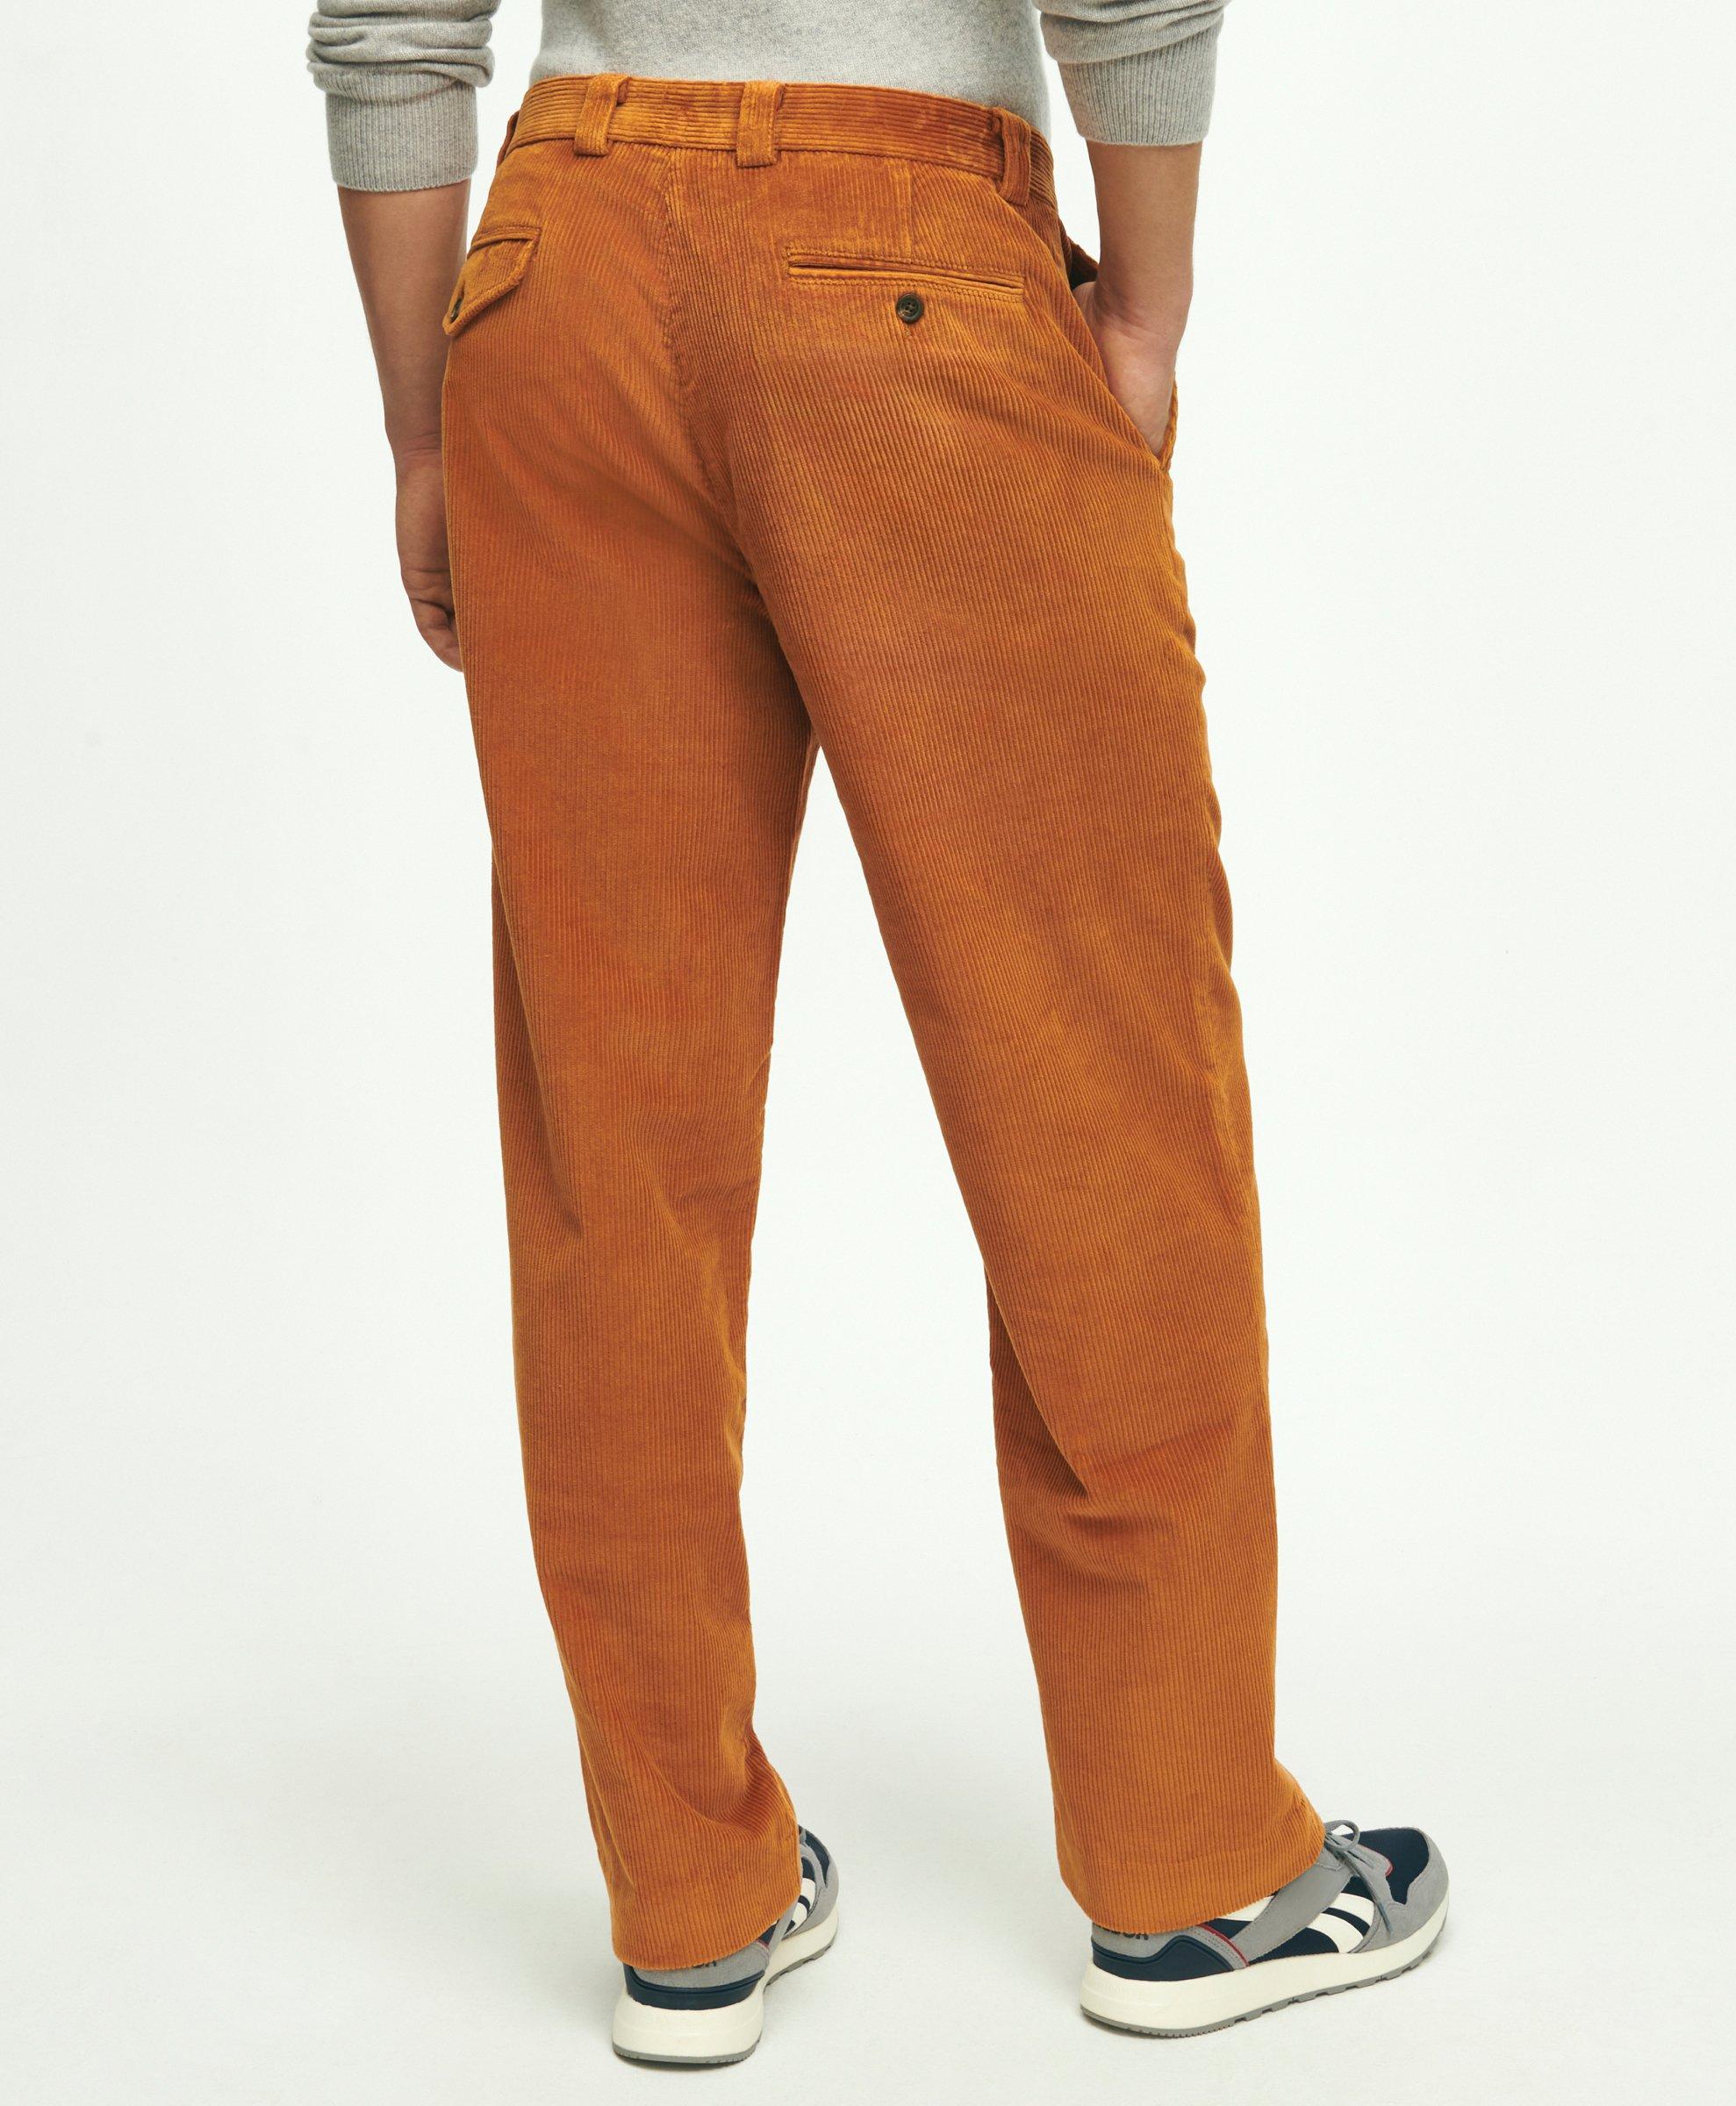 Wide Wale Corduroy Vintage Chinos, image 2